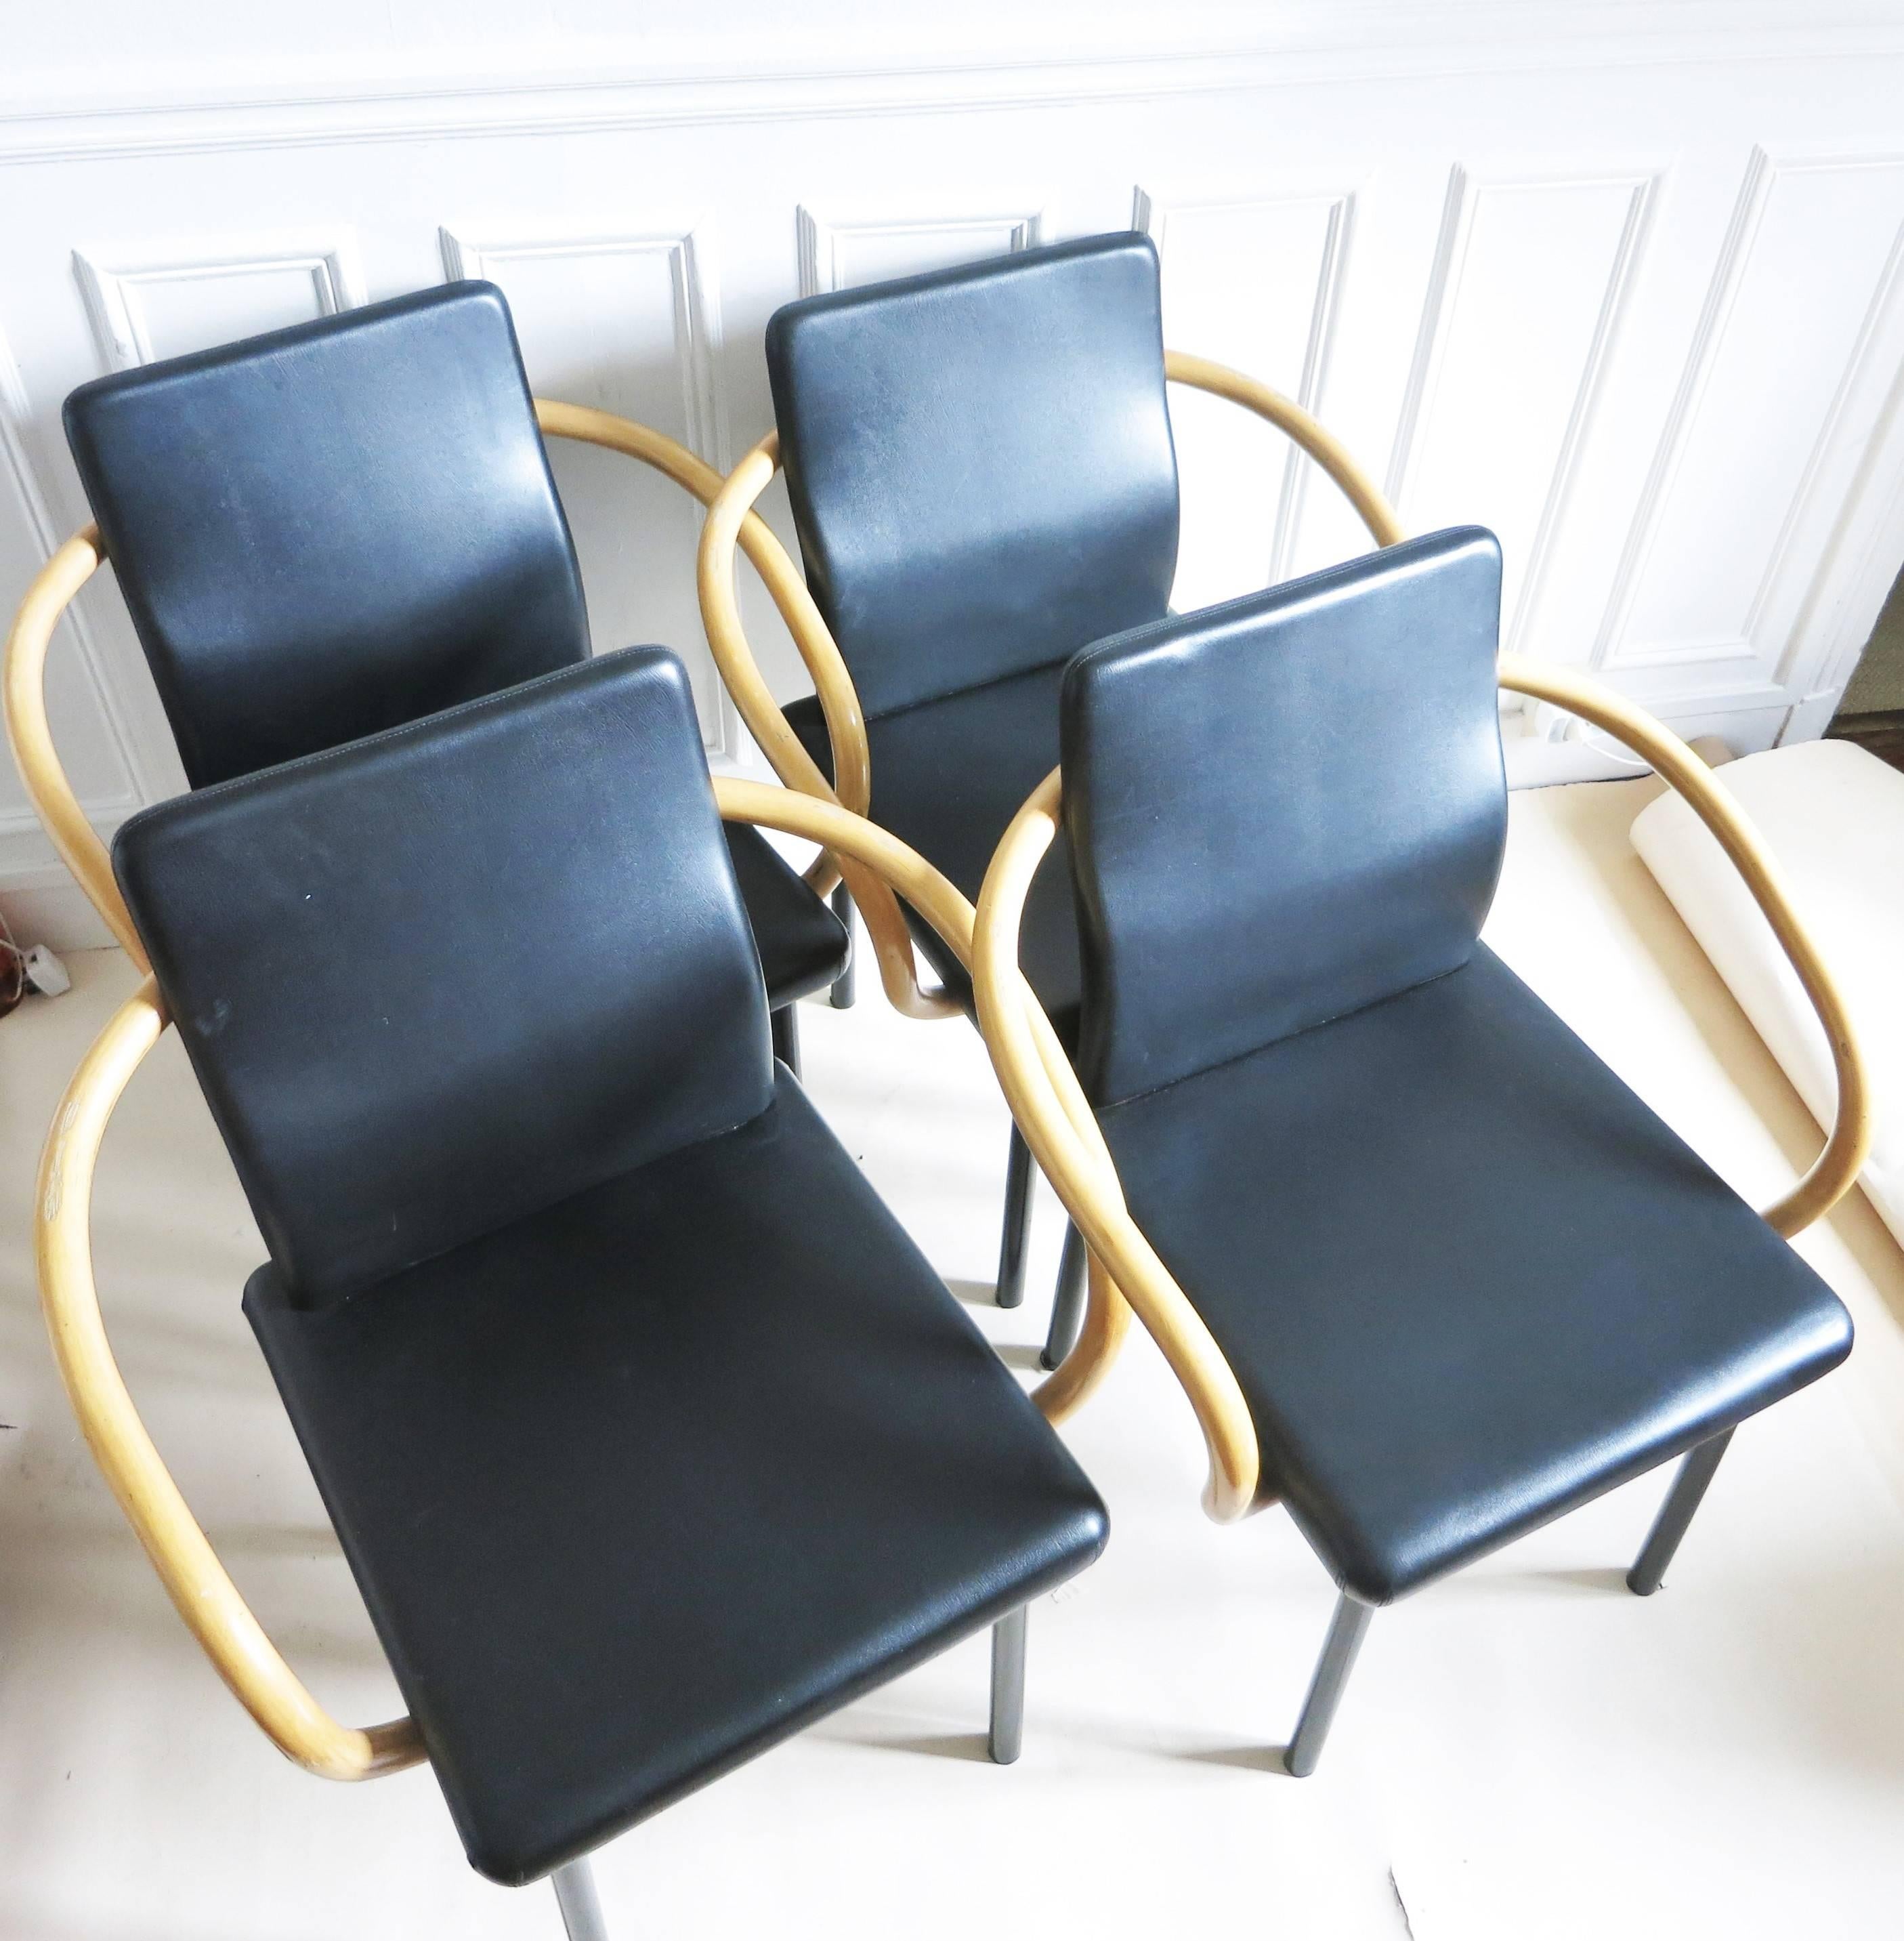 Set of four chairs Mandarin designed by Ettore Sottsass for Knoll International in 1986
Black leather on the polyurethane foam and arm in rattan, 4 feet in black lacquered metal tube.